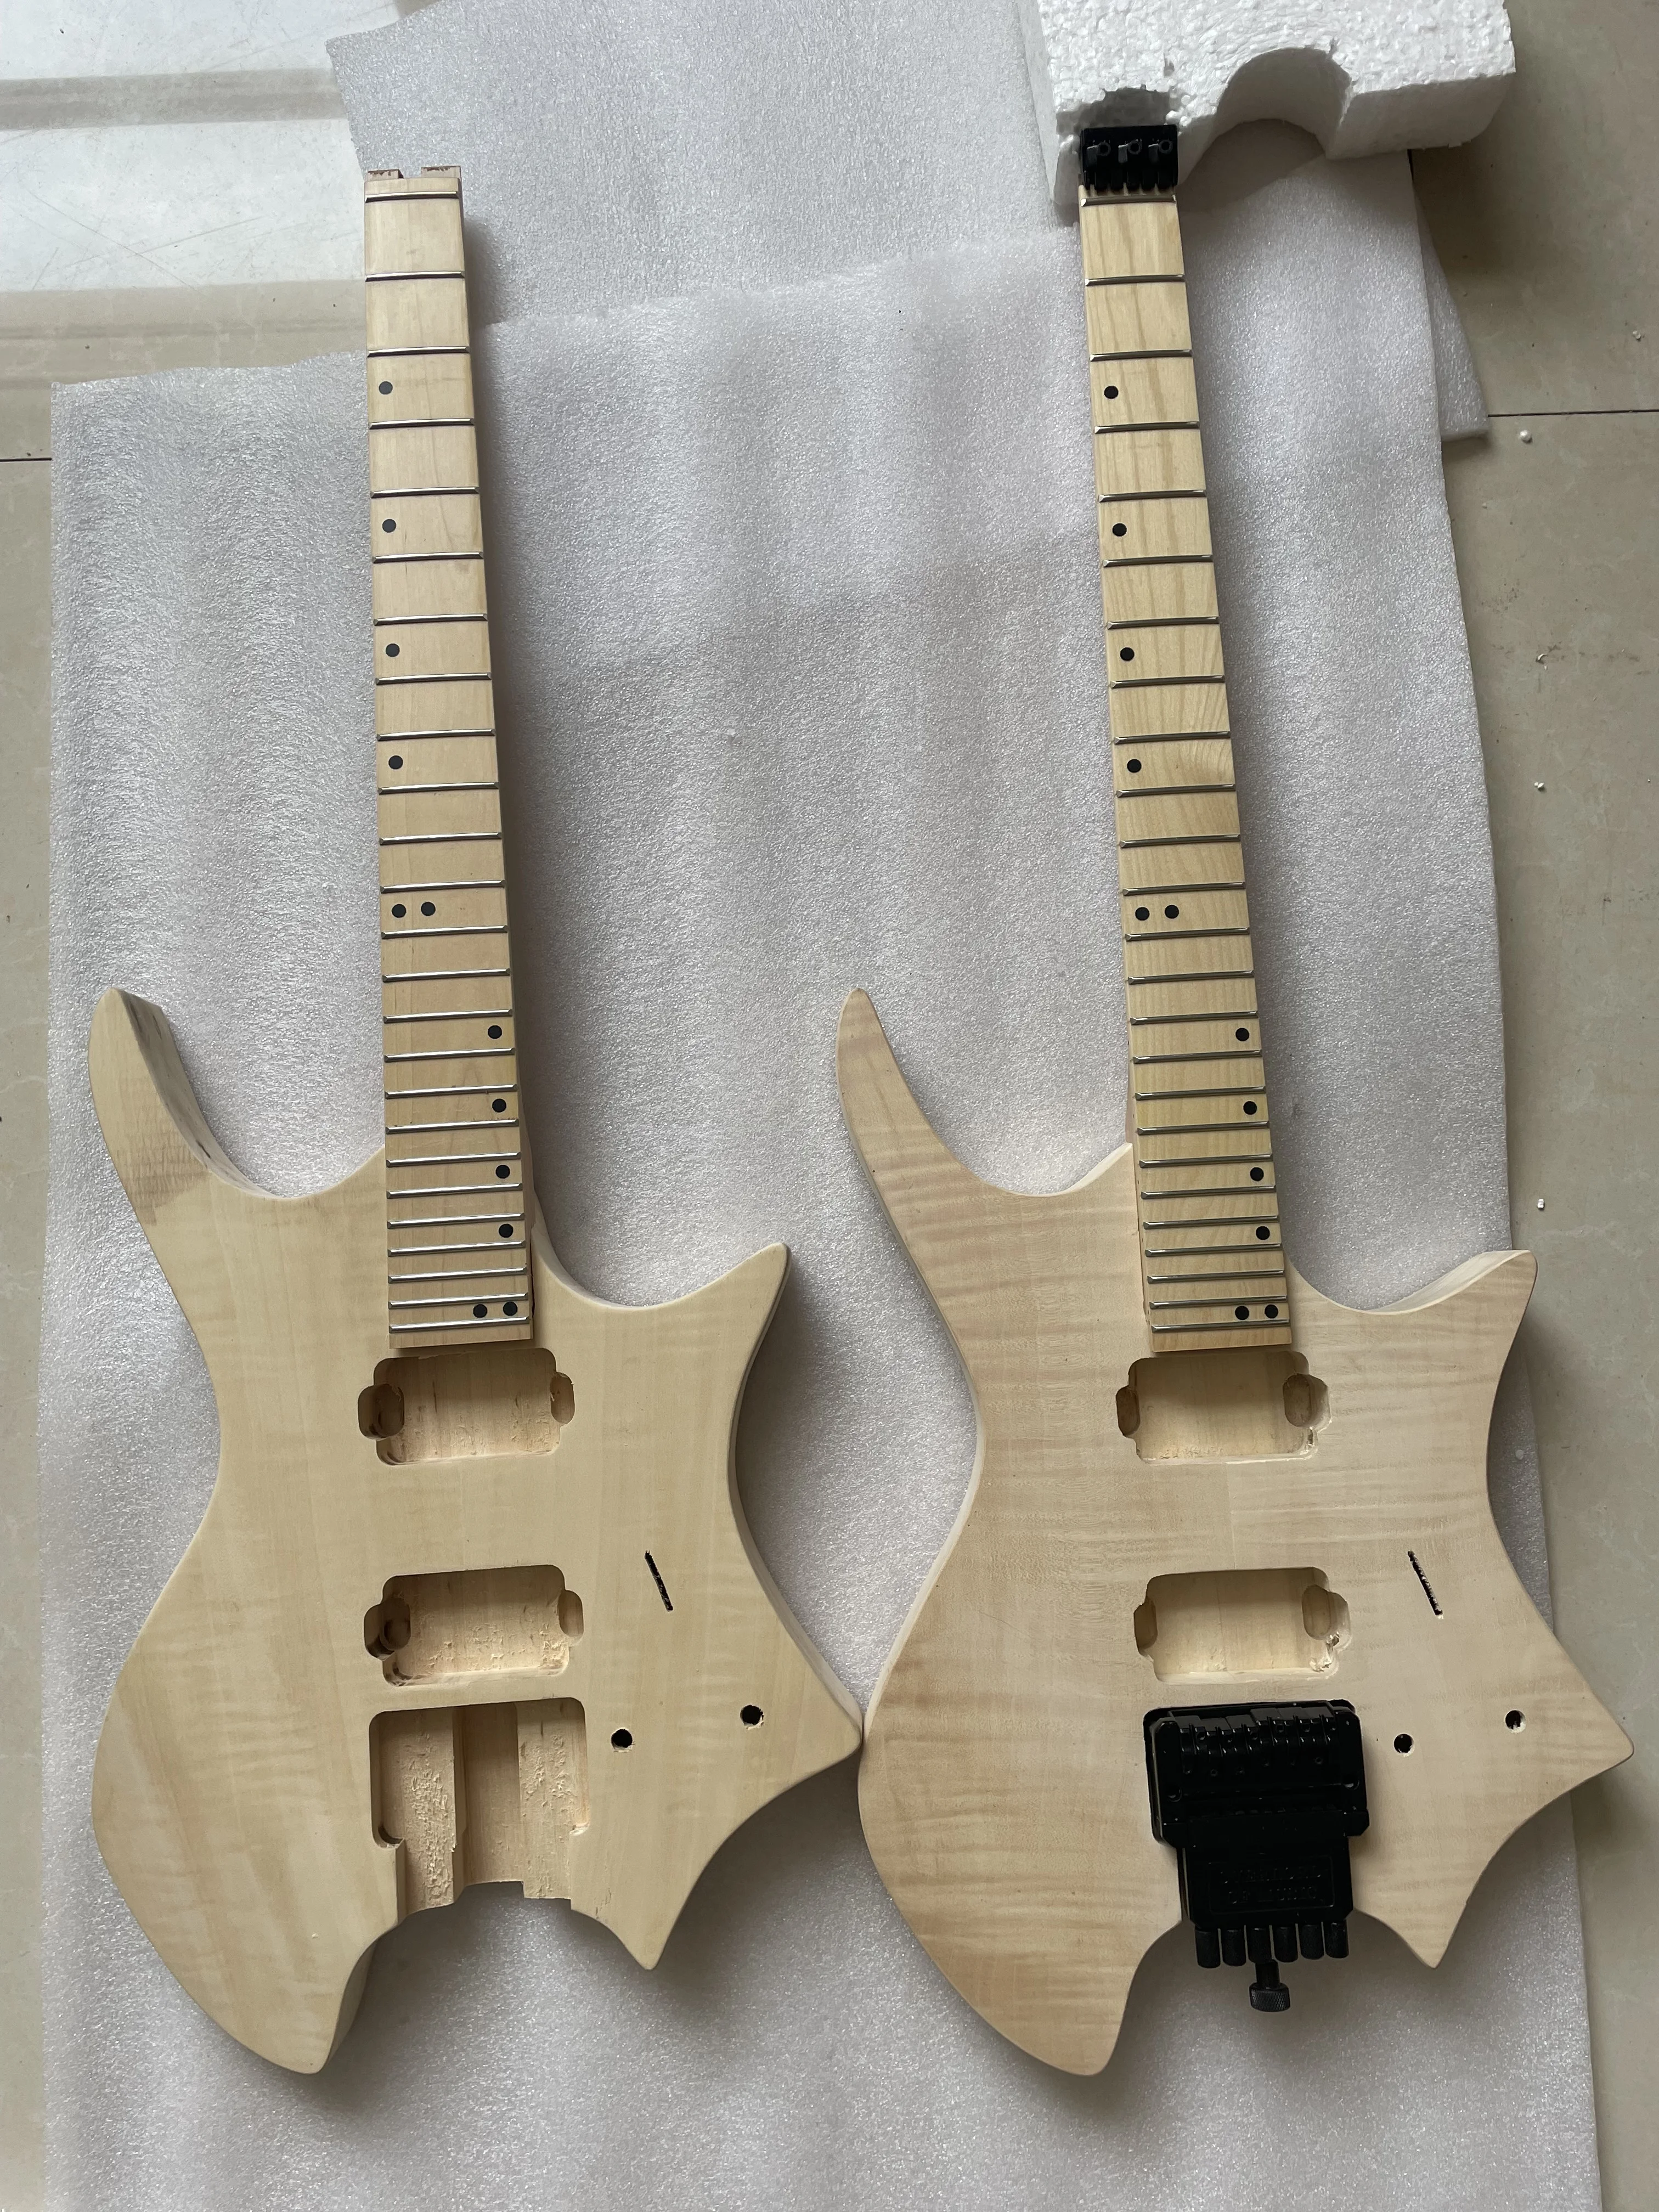 

Brand New Blank Headless Electric Guitar Unfinished Professional Luthier DIY Guitar Kit Part Mahogany Body Maple Veneer Neck